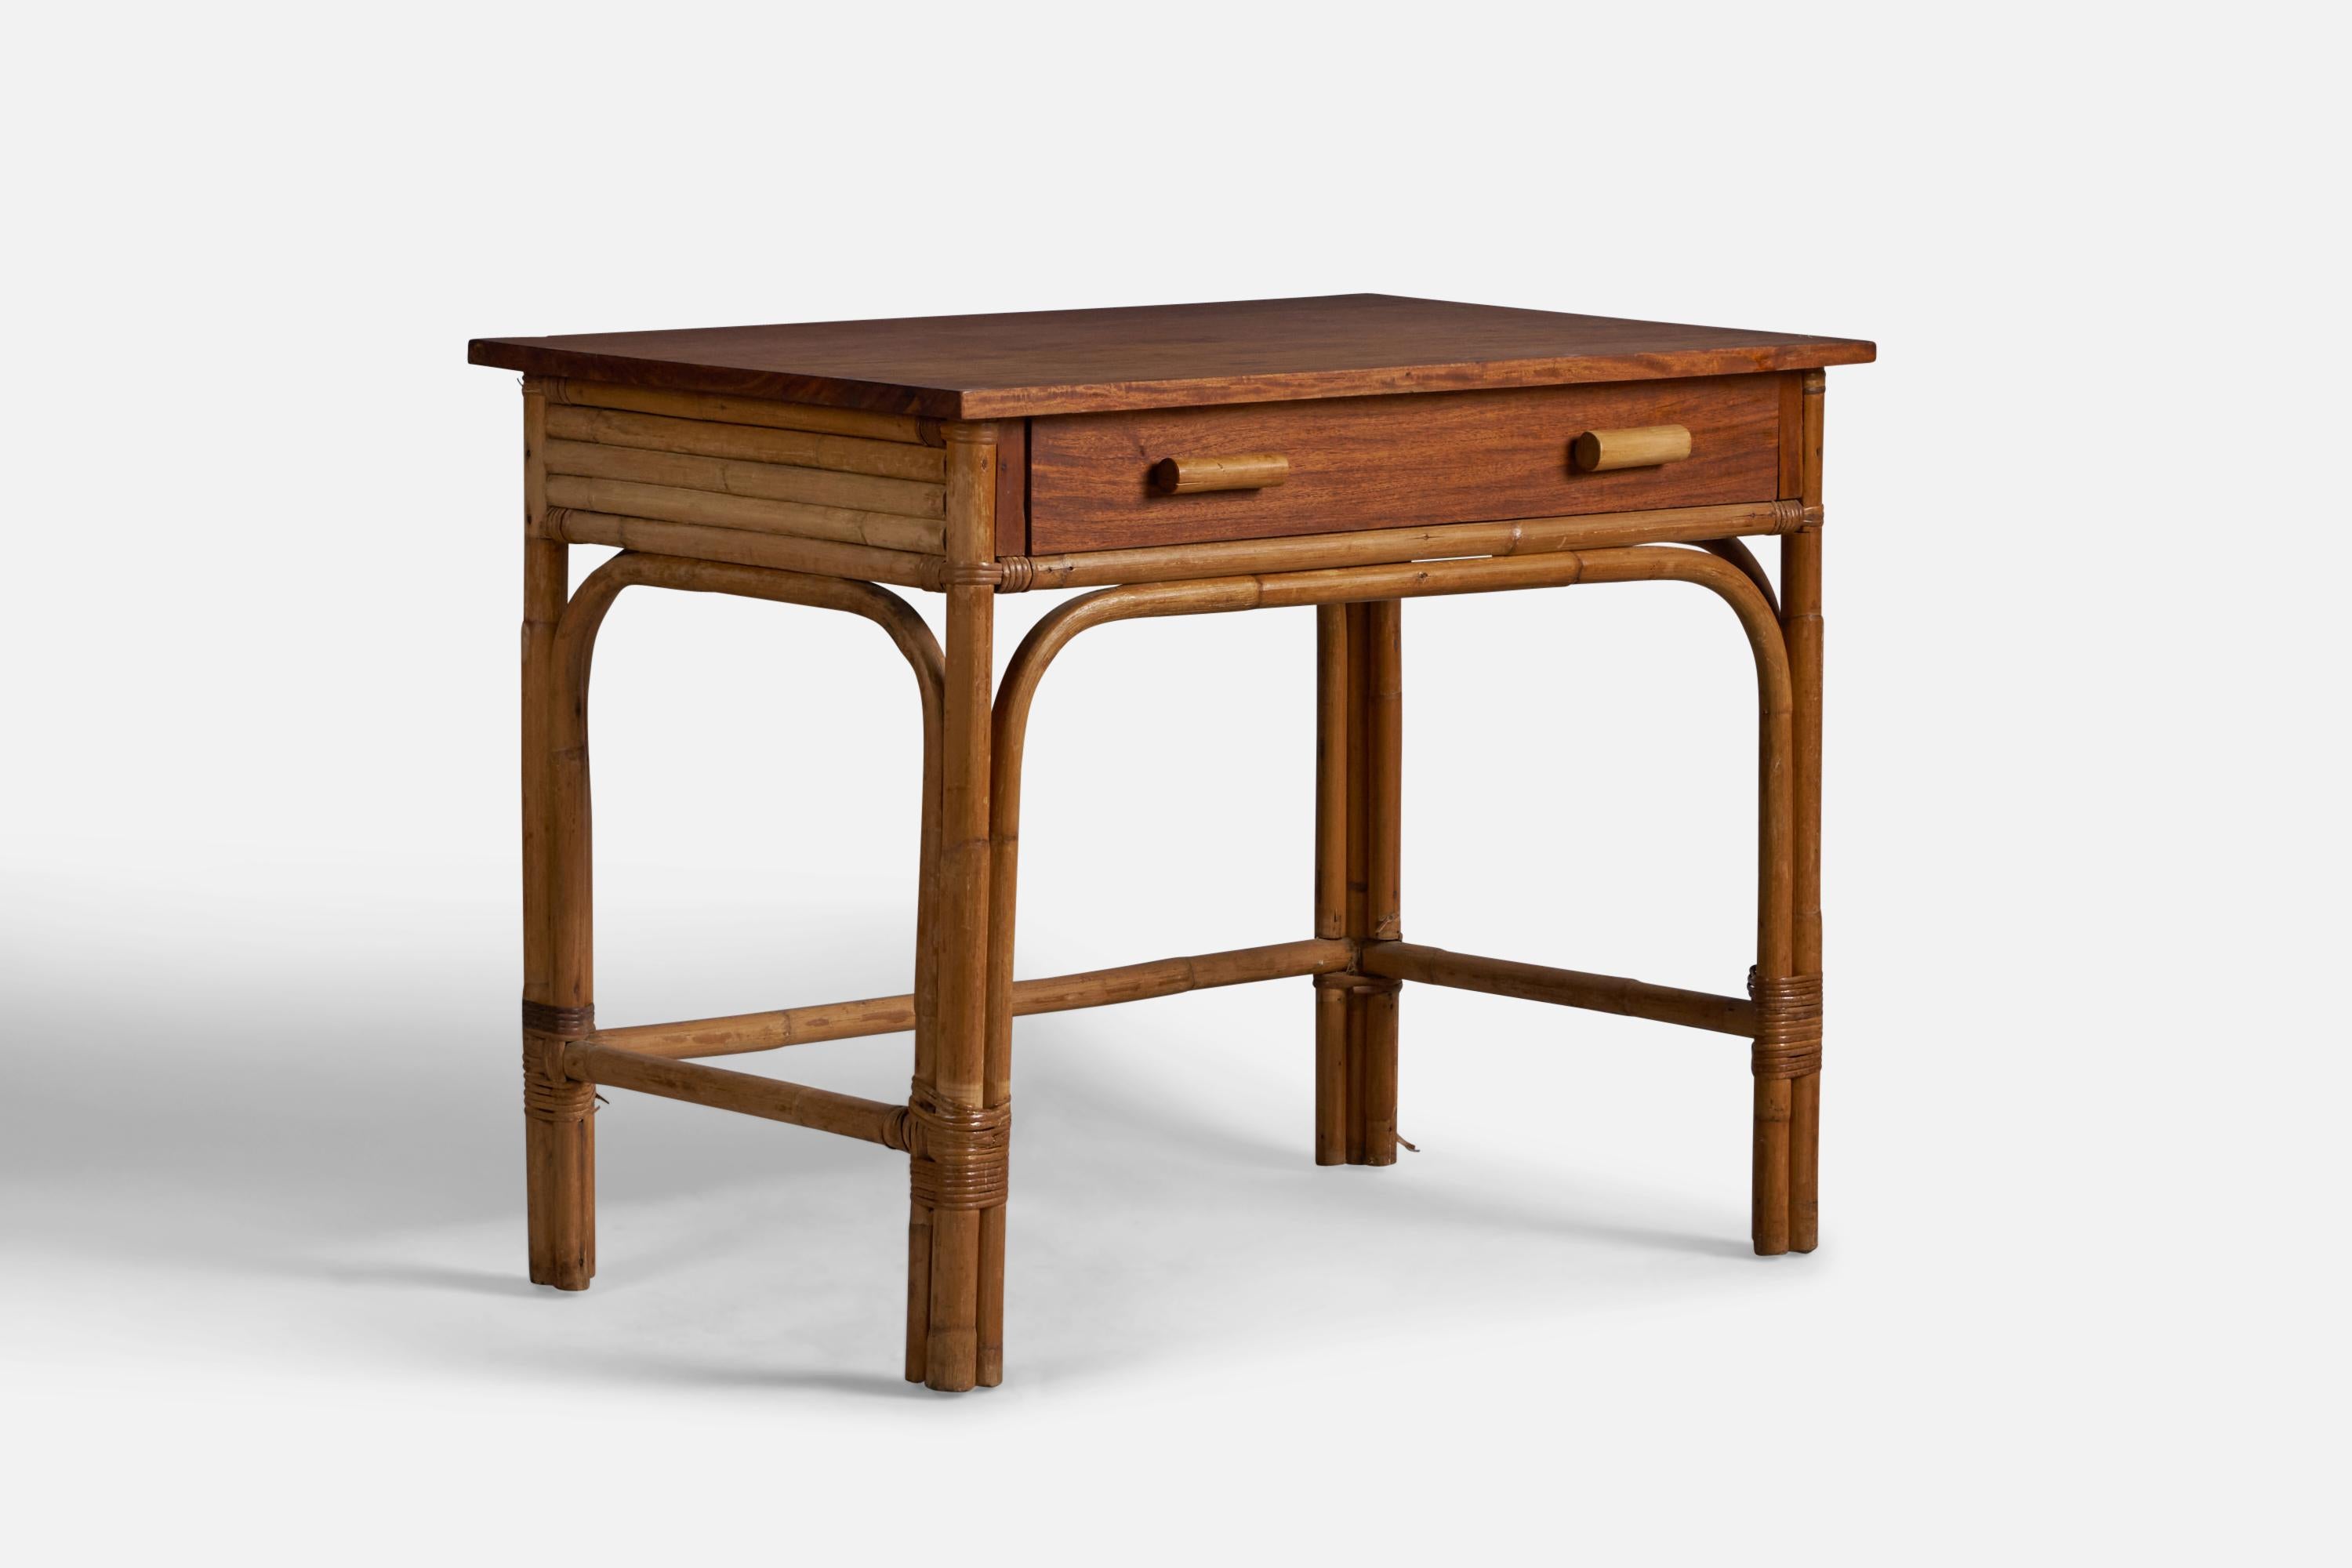 A small oak, bamboo and rattan writing desk designed and produced in the US, c. 1950s.